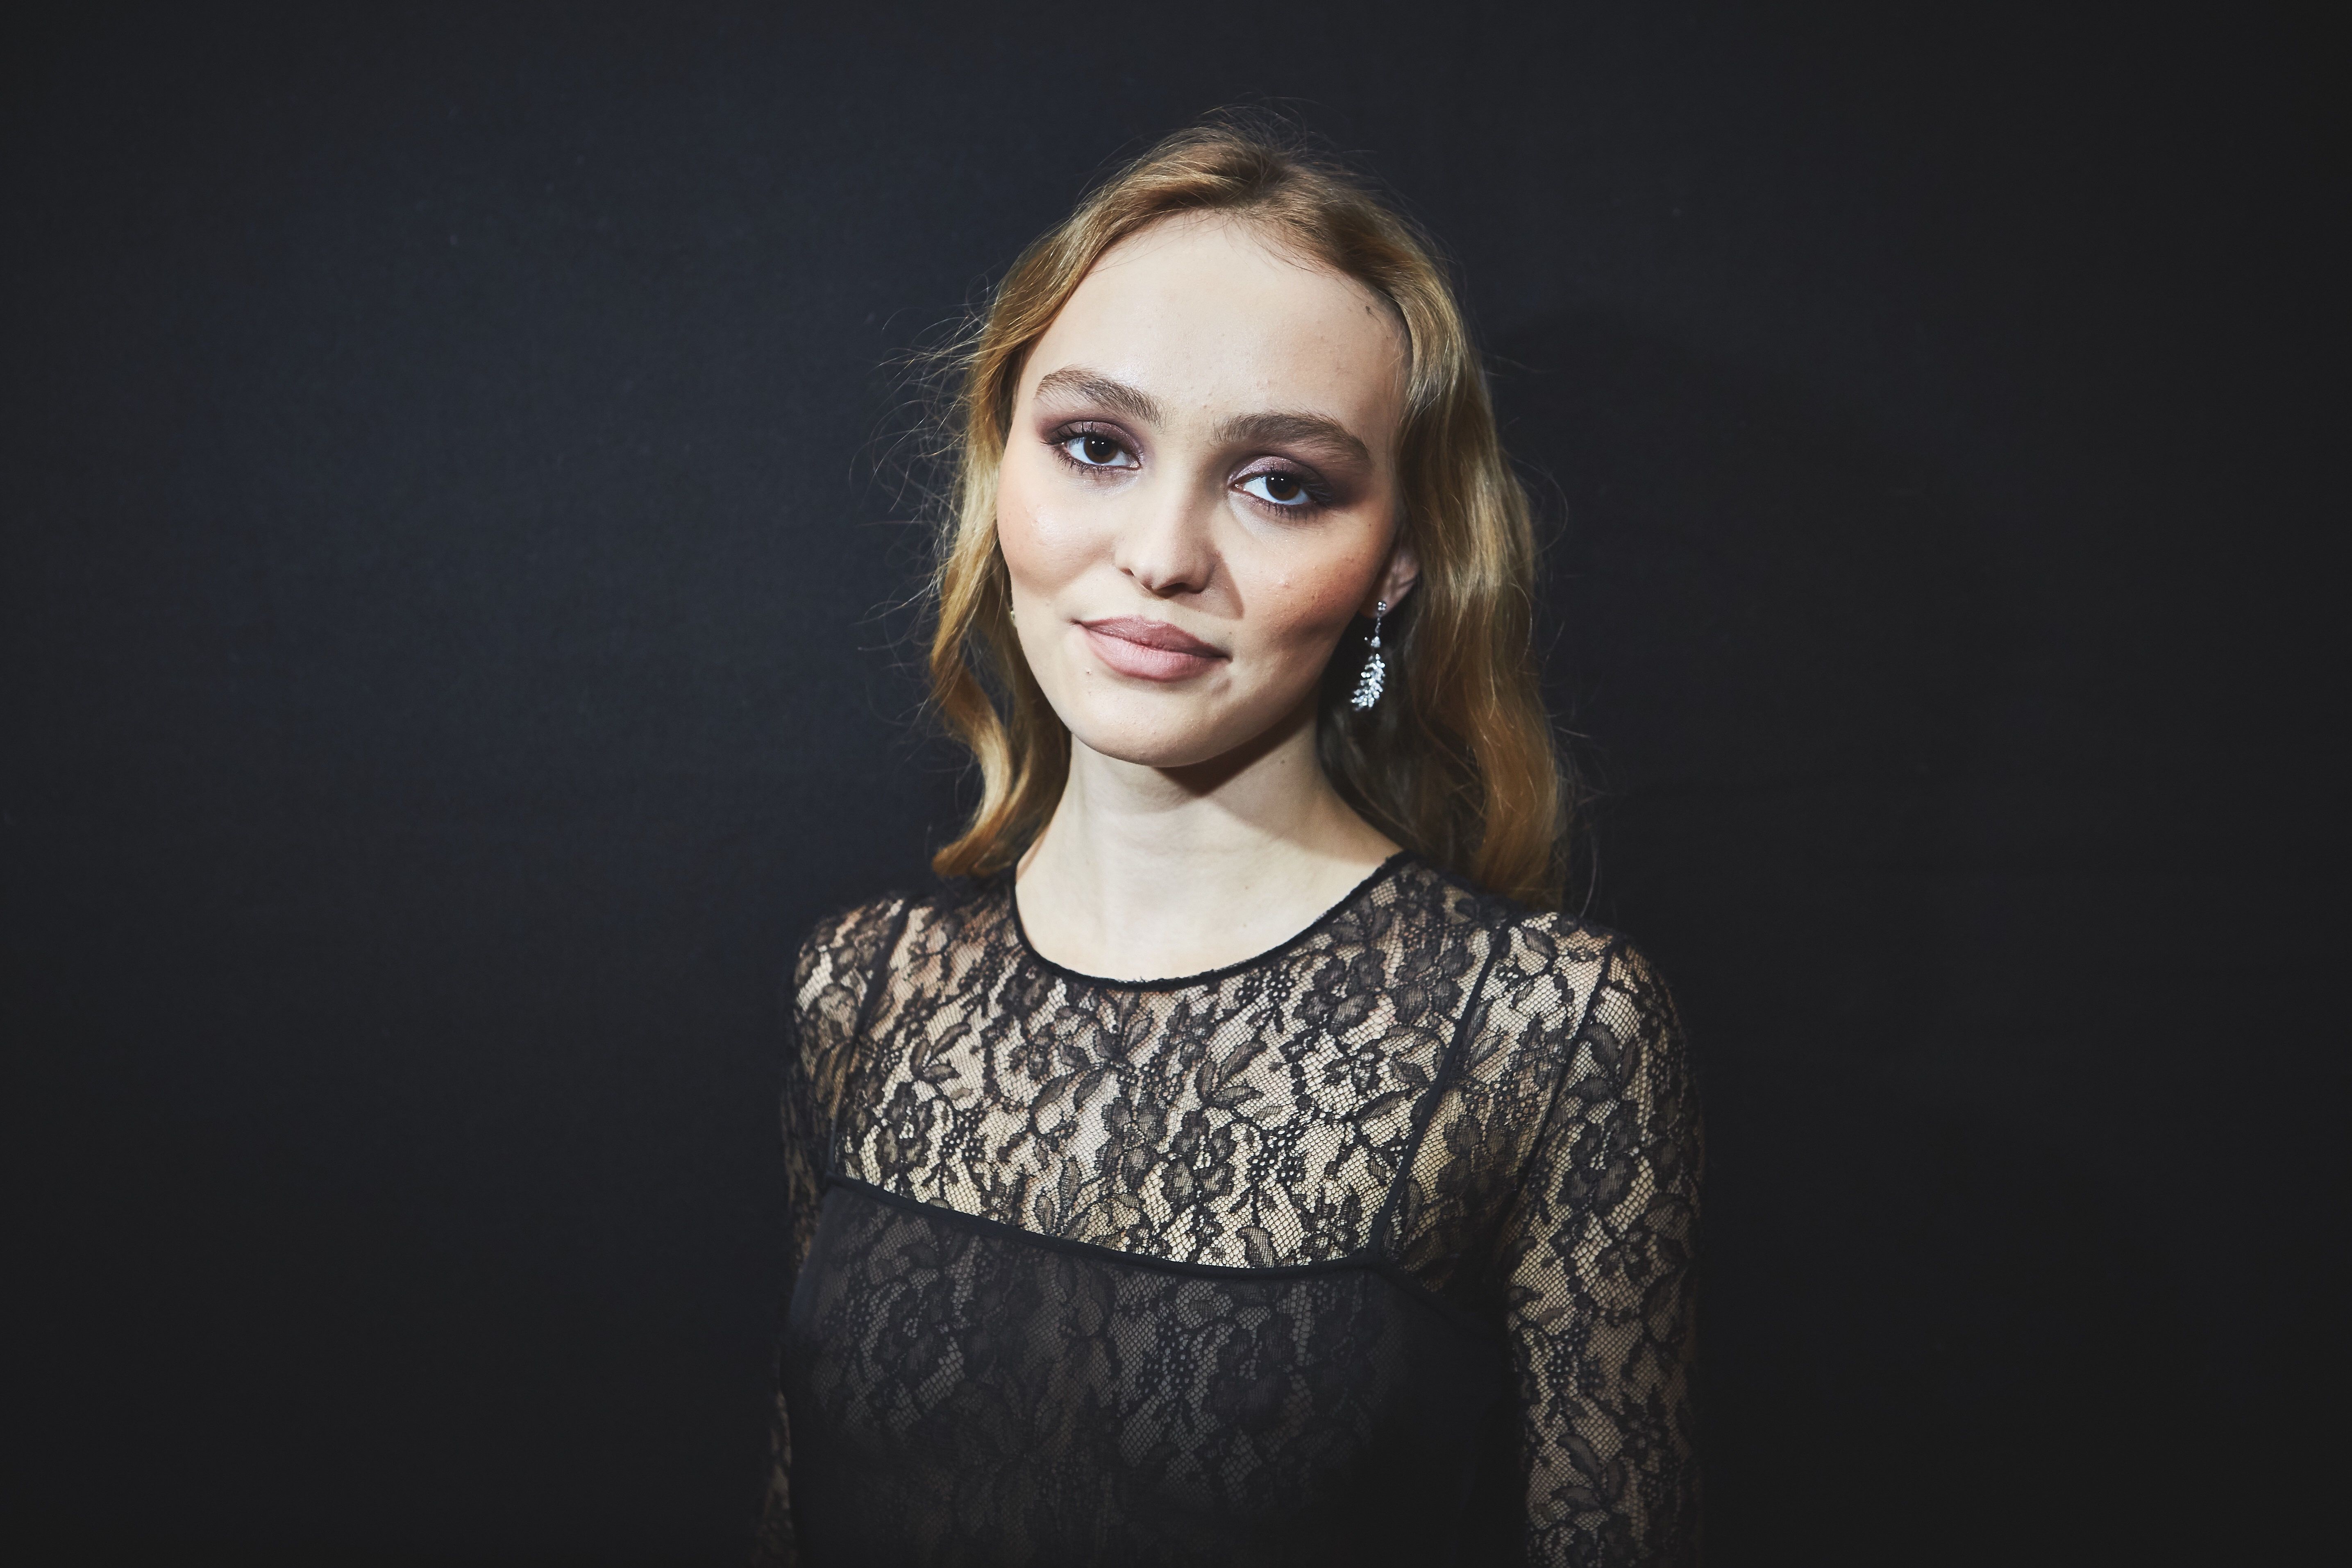 5K Lilly Rose Depp 2020 Wallpaper, HD Celebrities 4K Wallpaper, Image, Photo and Background